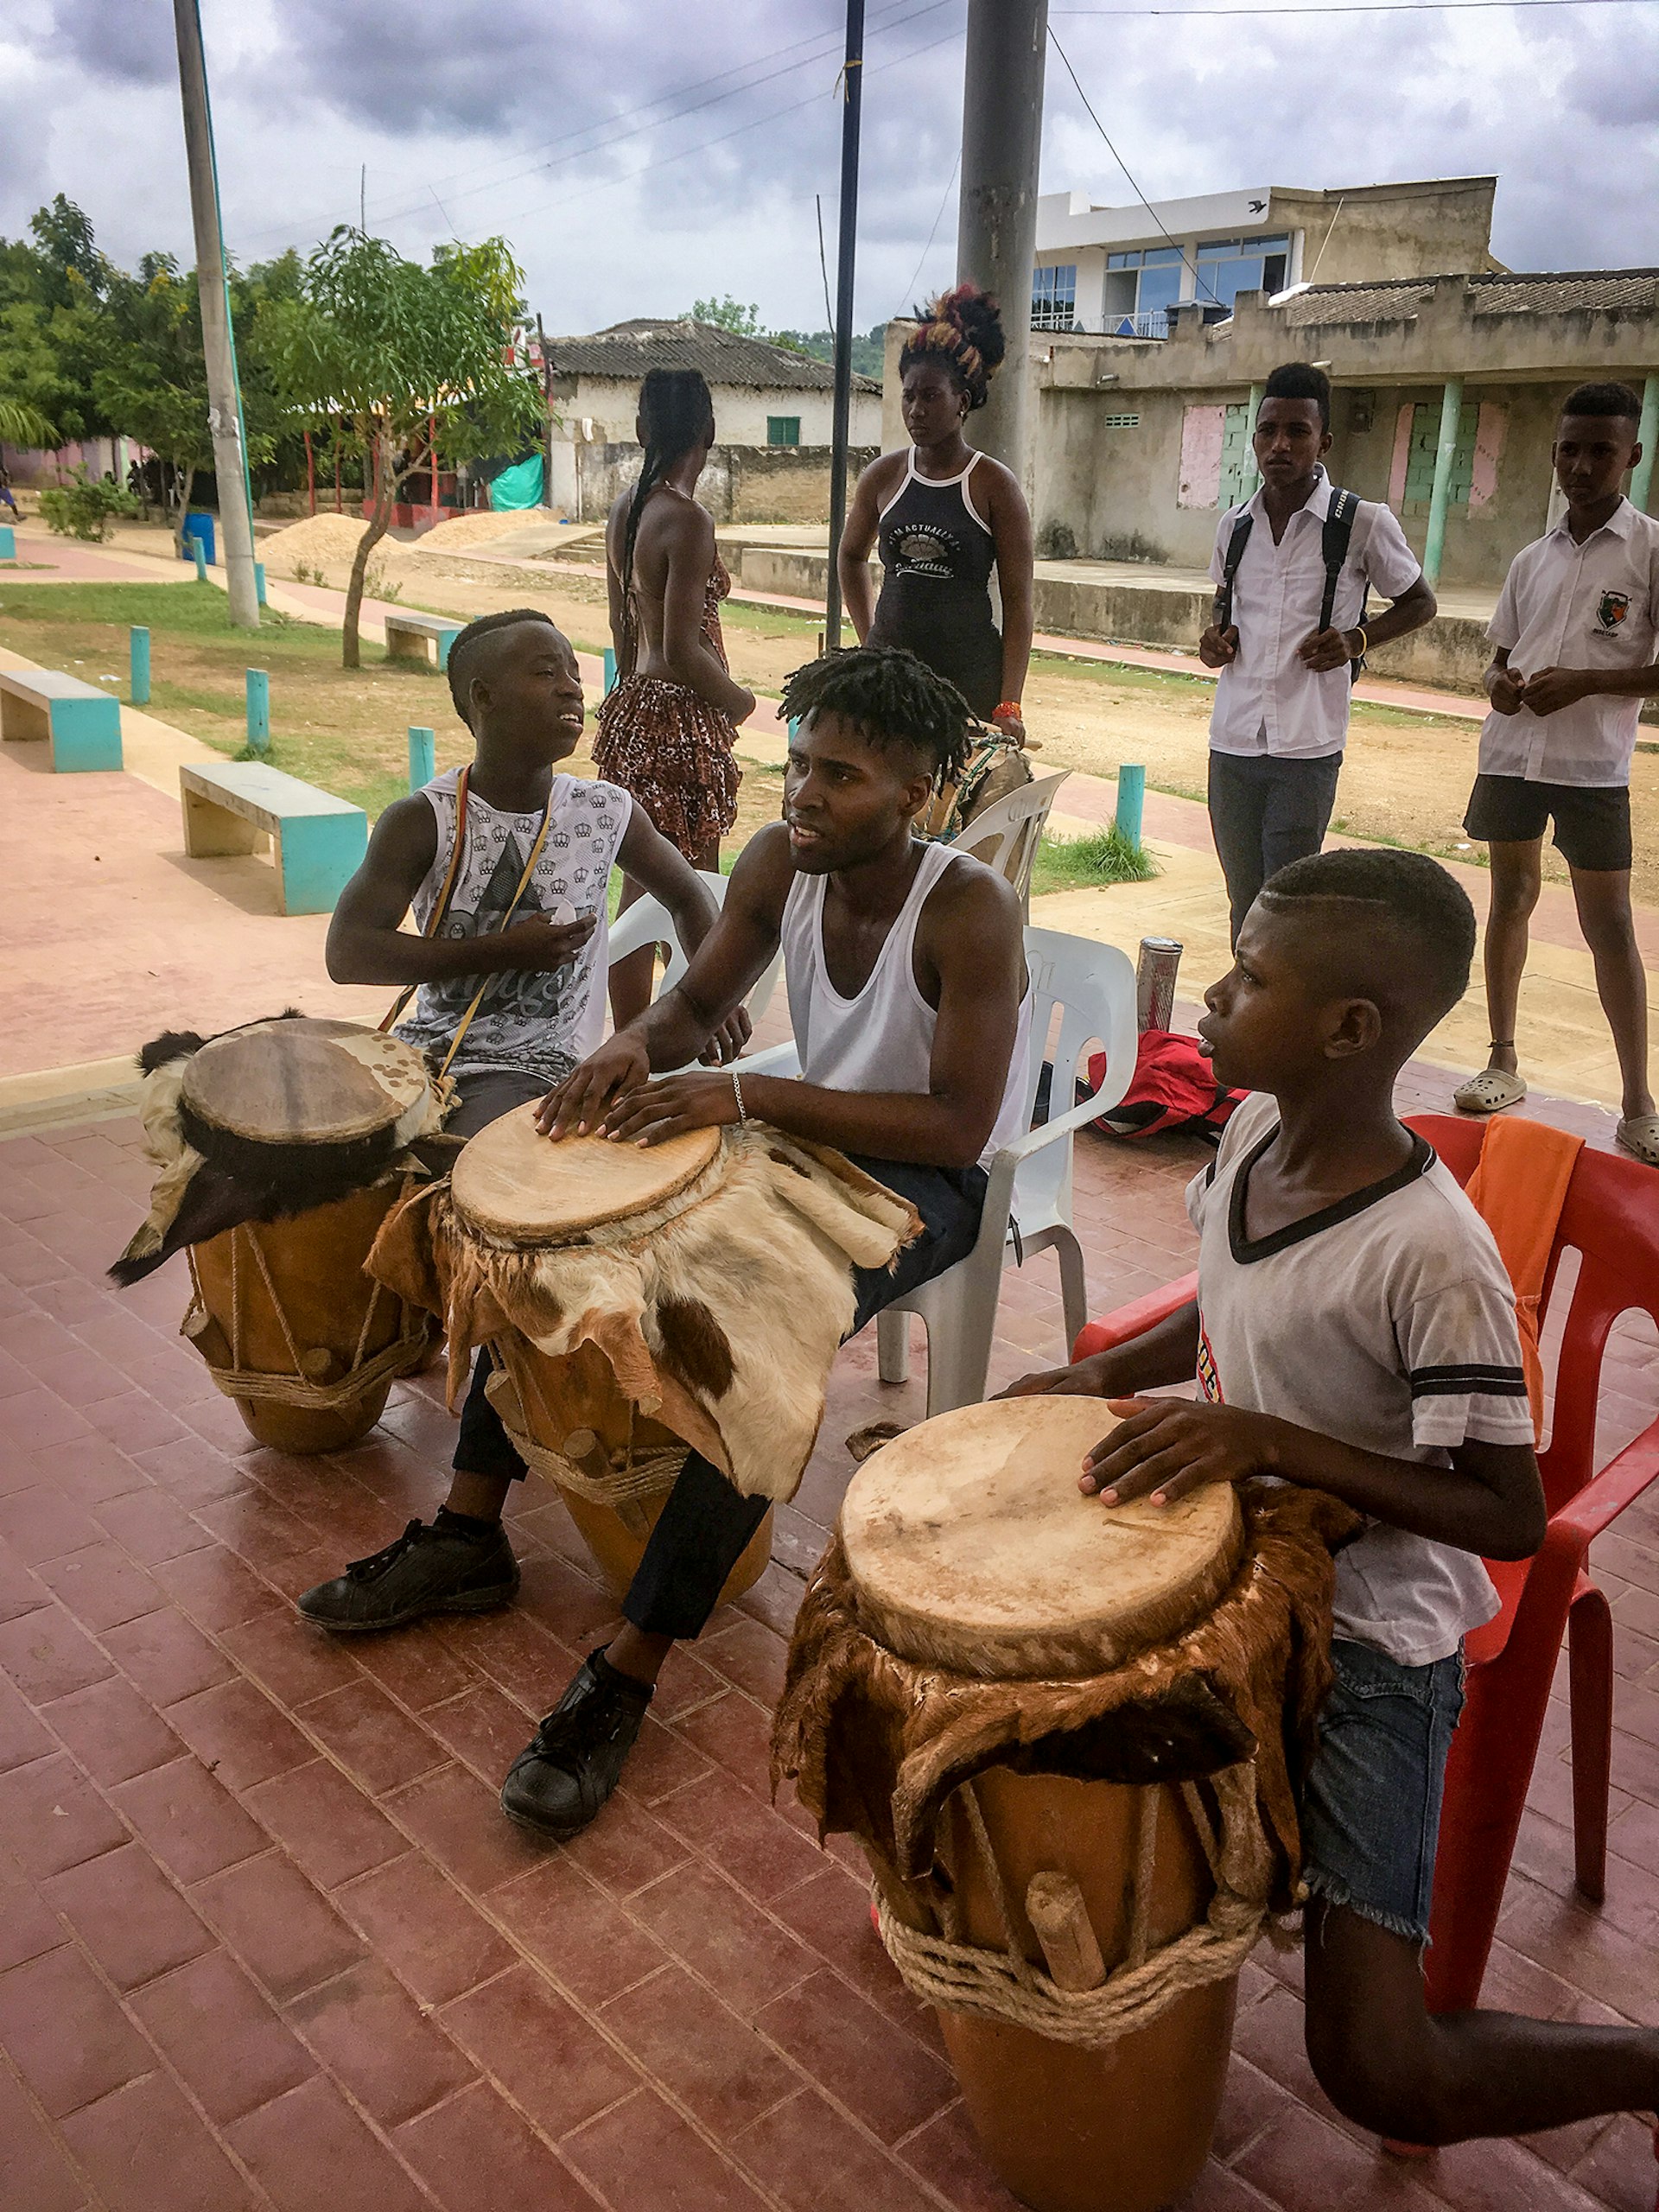 Three boys play traditional drums in Palenque, Colombia